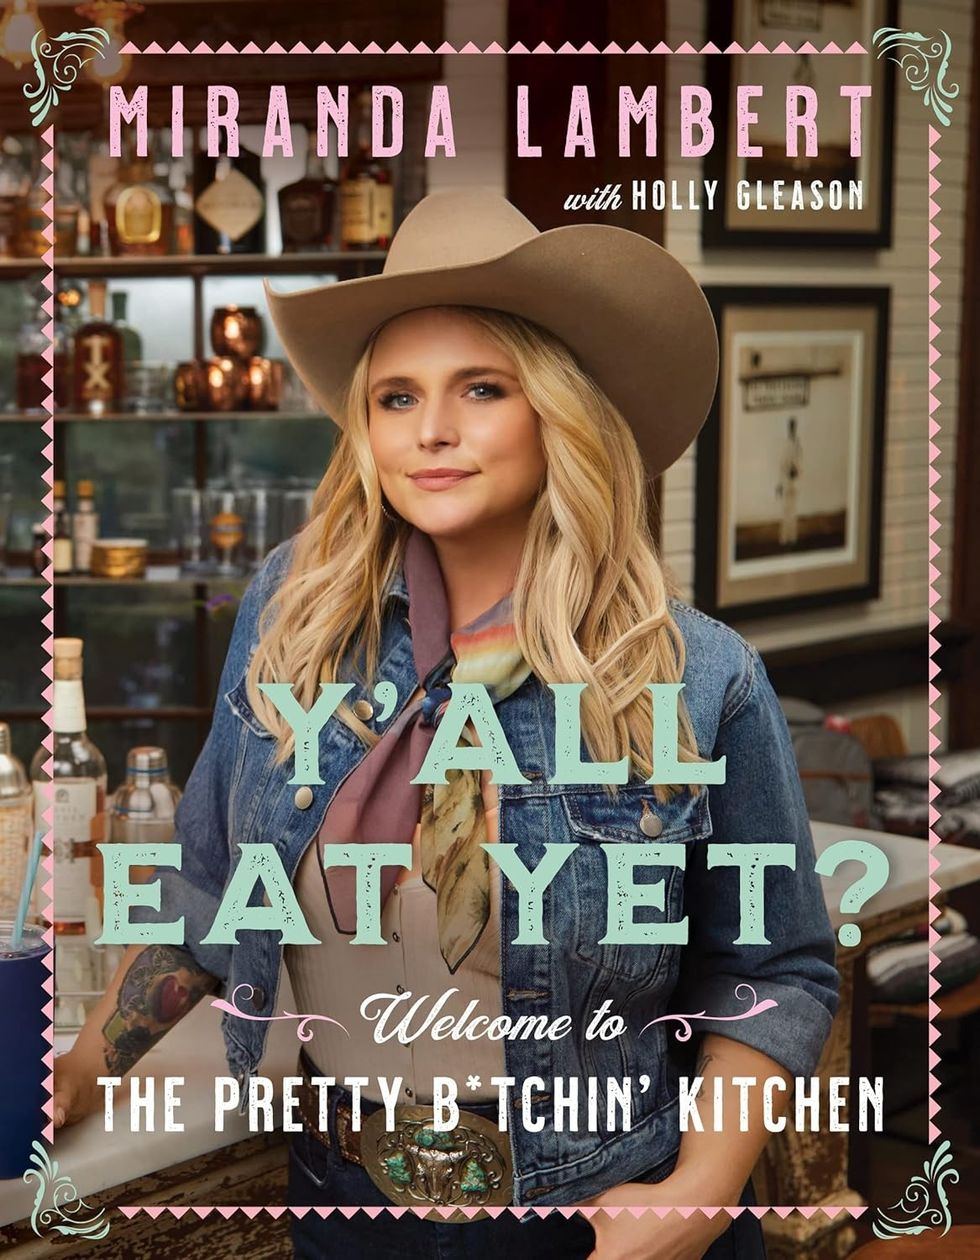 Y'all Eat Yet?: Welcome to the Pretty B*tchin' Kitchen by Miranda Lambert with Holly Gleason